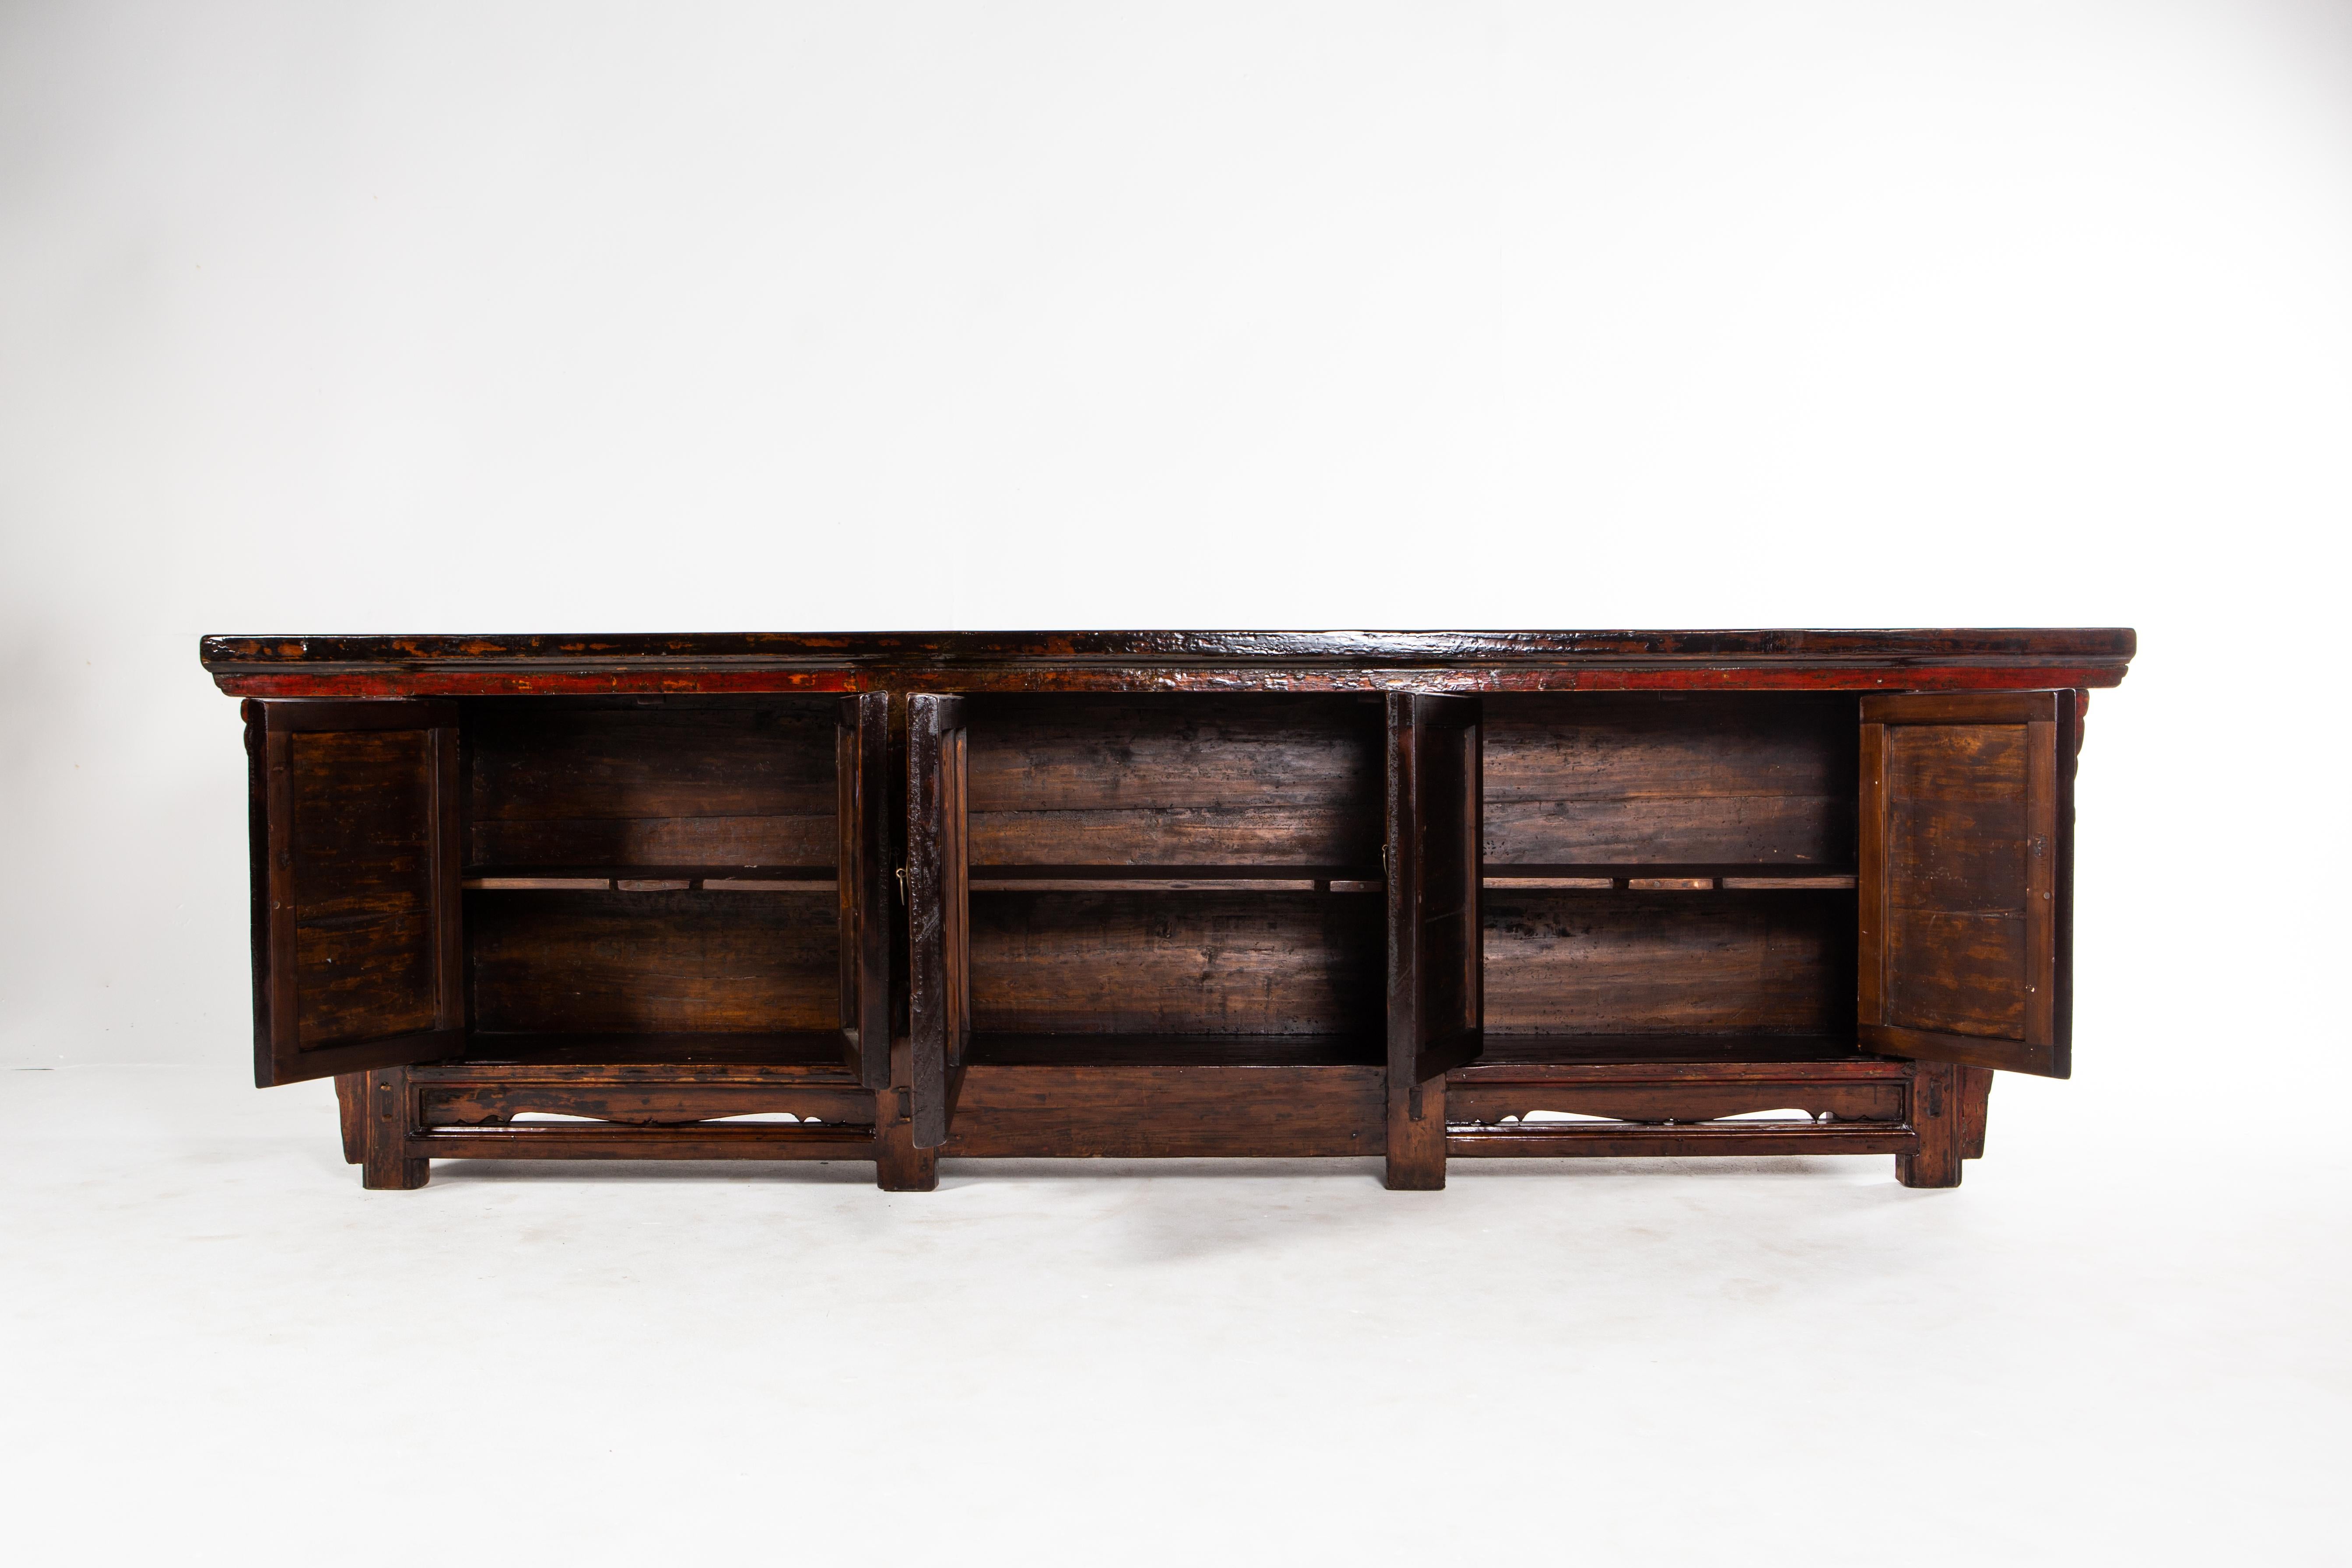 This beautiful sideboard is from Gunsu, China and was made from pine wood and lacquer, circa 1920. The piece features a beautifully aged original patina, 3 pairs of doors, shelves, and some of the original paint still visible. Wear consistent with